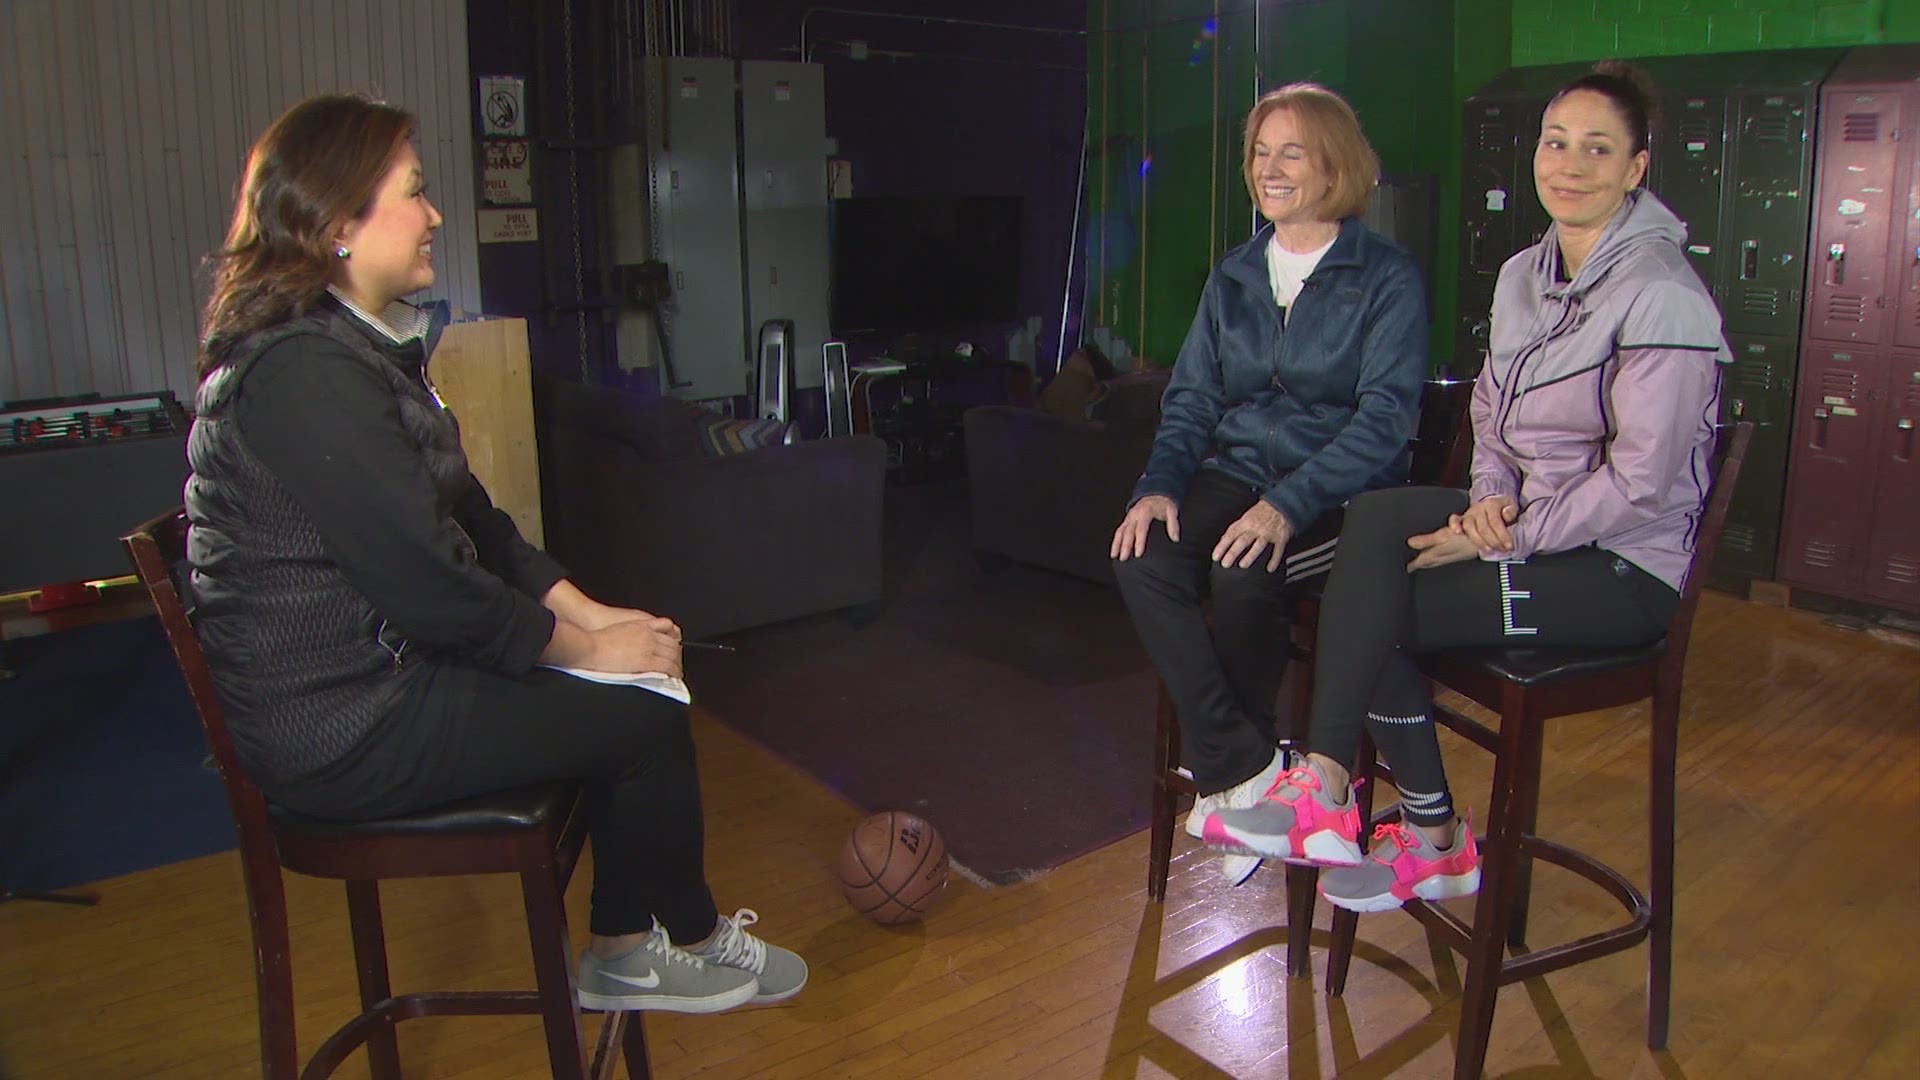 Seattle Mayor Jenny Durkan and Seattle Storm star Sue Bird talk about their love of basketball, records of breaking glass ceilings, and passion to inspire a younger generation.